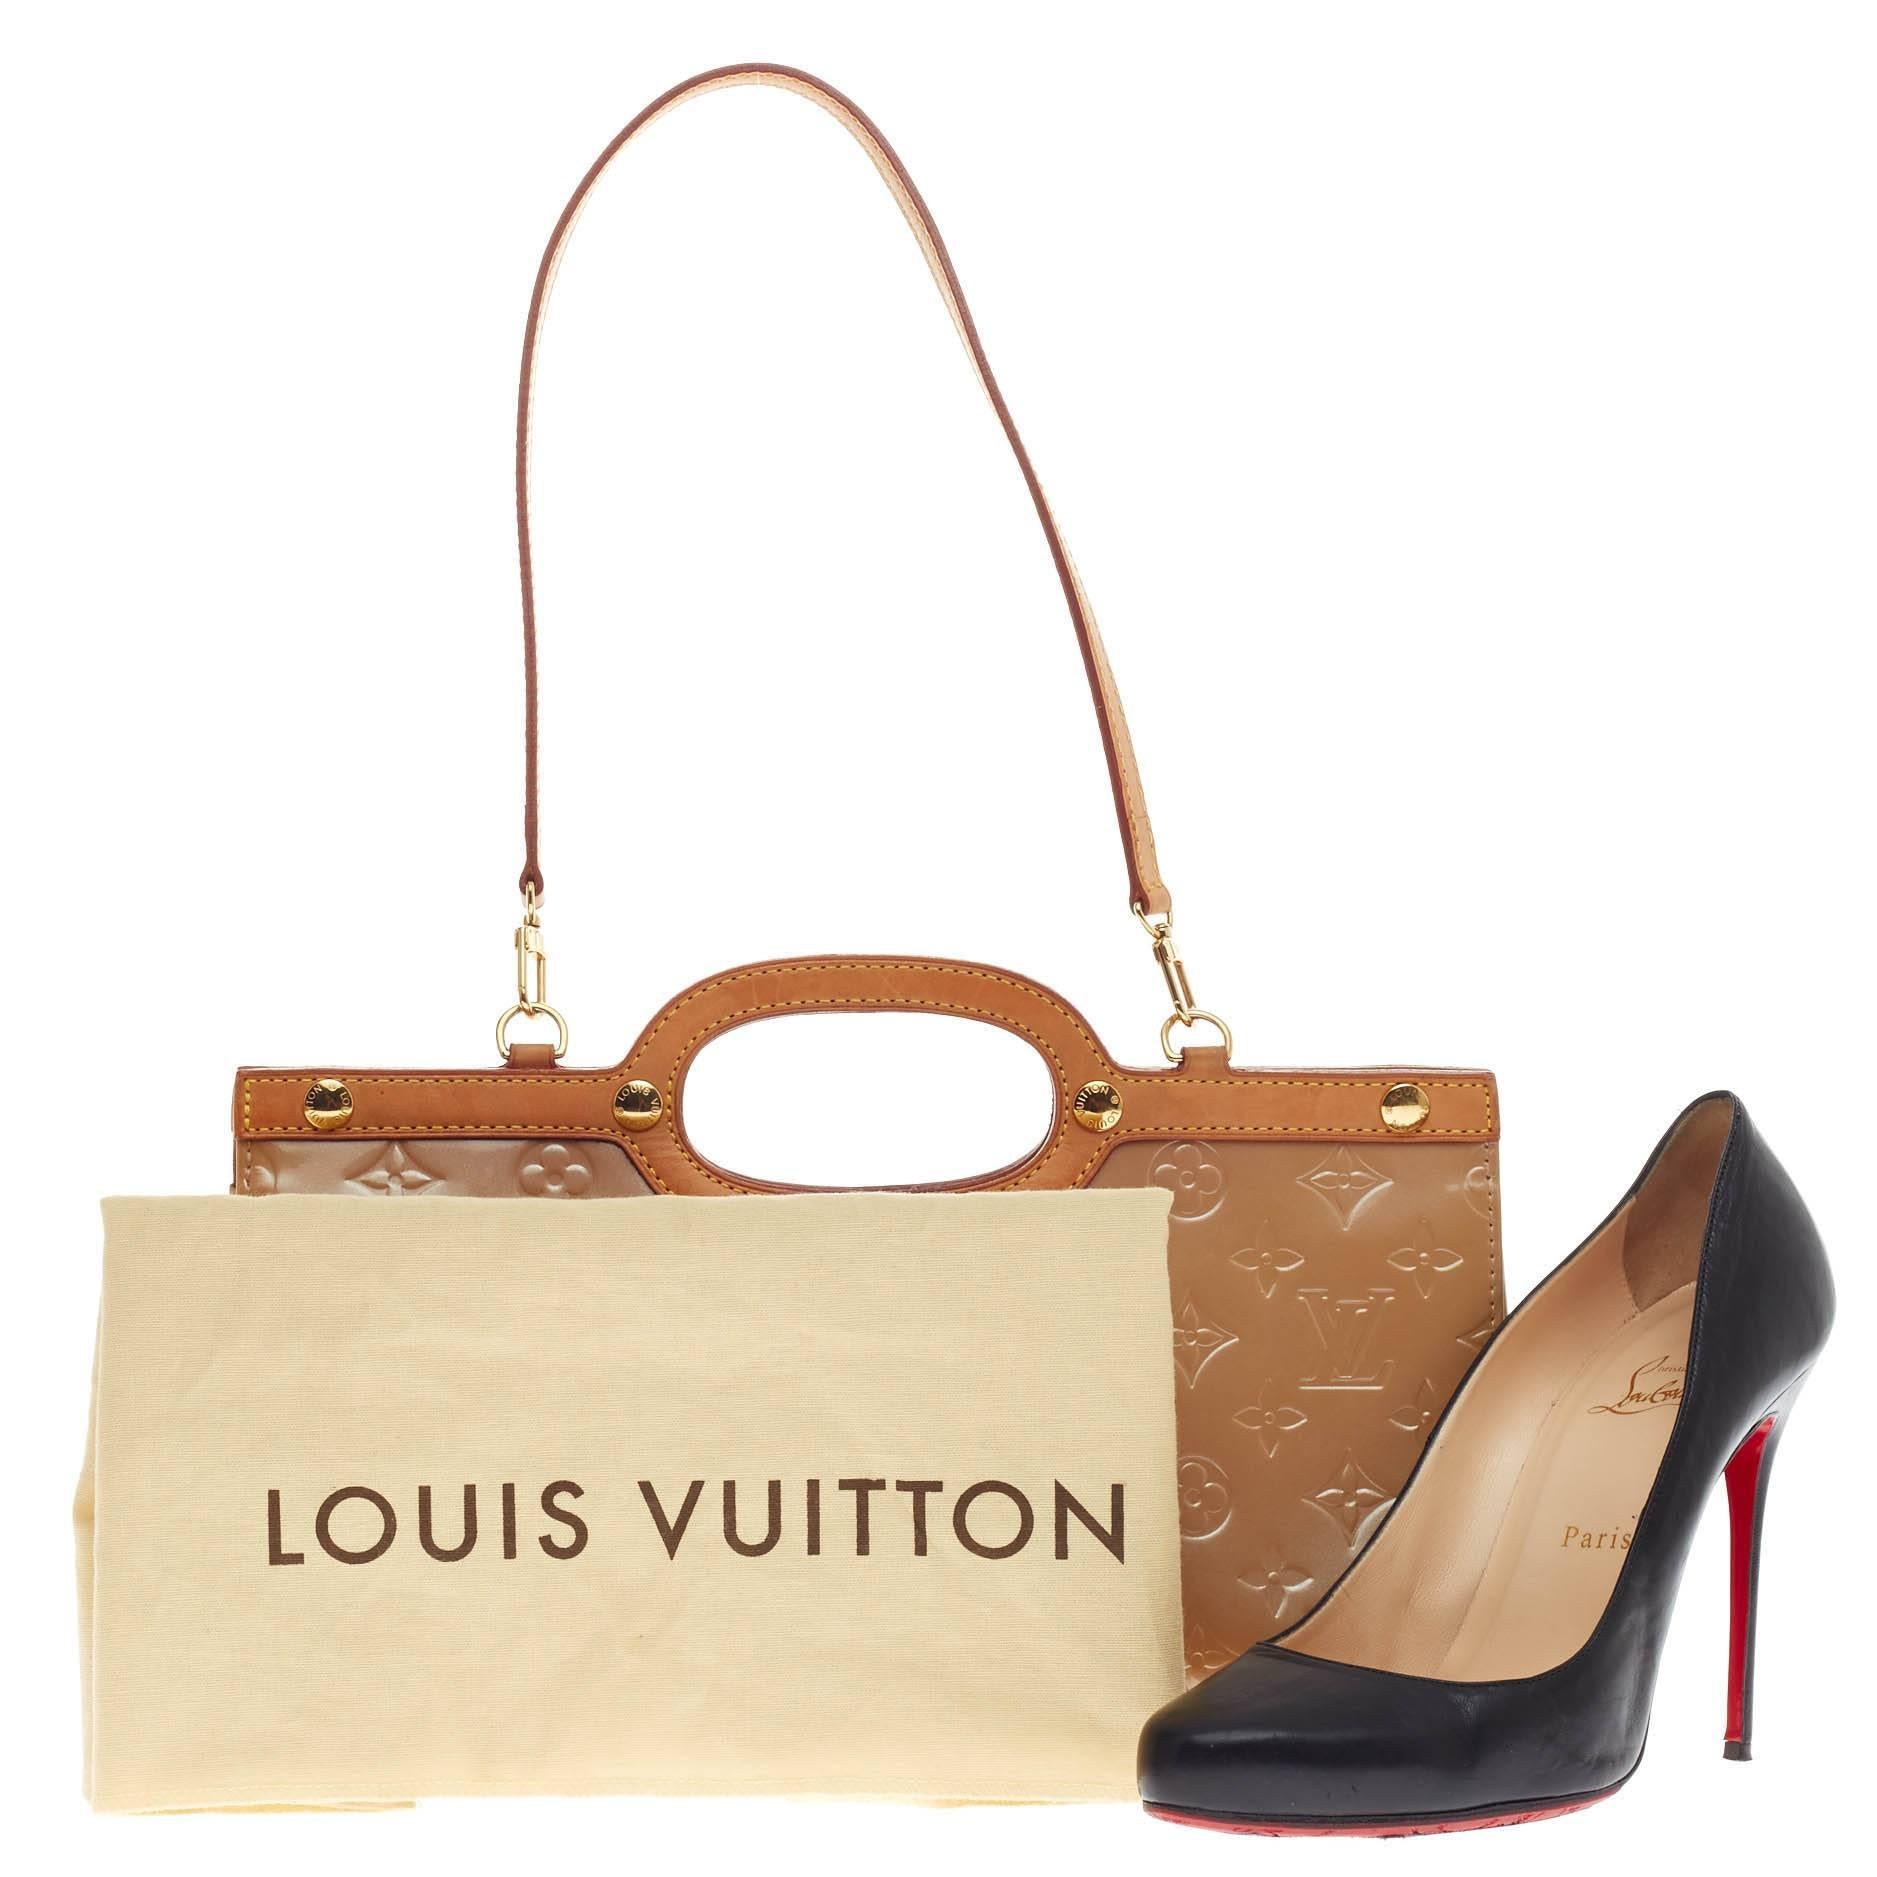 This authentic Louis Vuitton Roxbury Drive Bag Monogram Vernis showcases a unique boxy, triangular silhouette. Constructed from noisette tan patent monogram vernis leather, this bag features flat vachetta leather handles and trims, and gold-tone